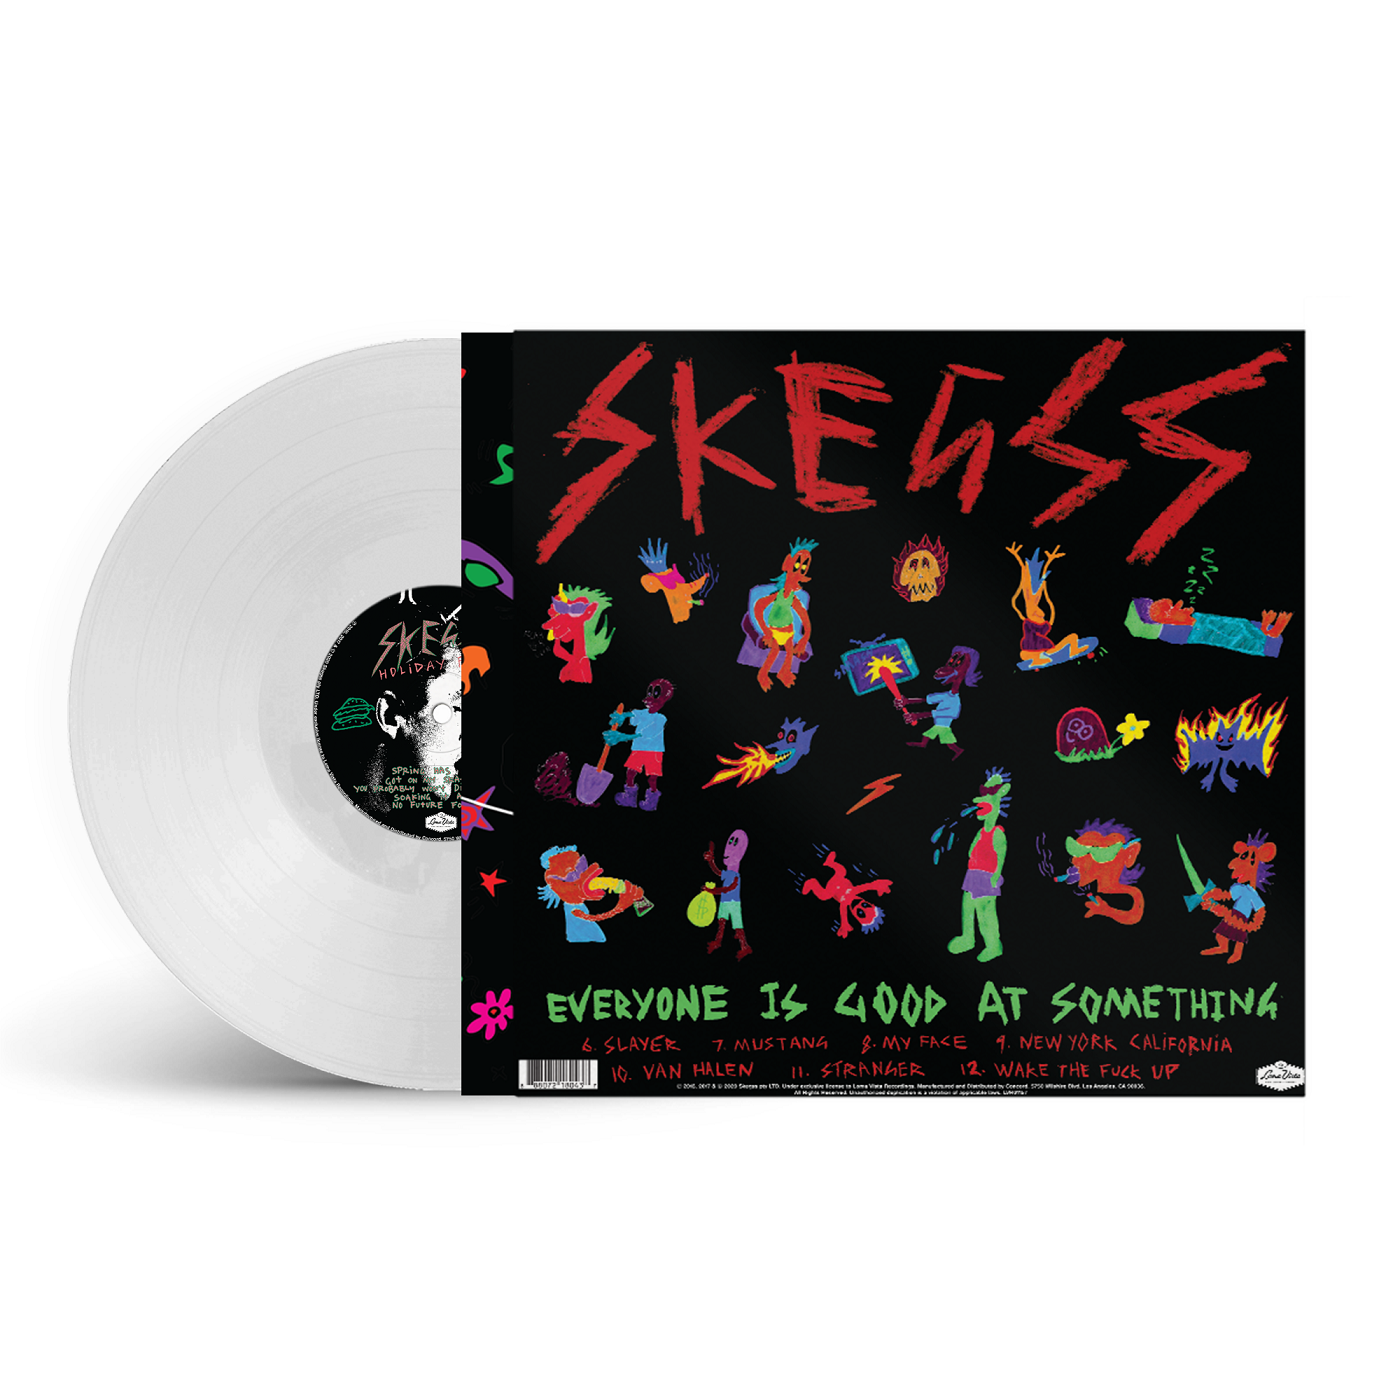 Holiday Food + Everyone Is Good At Something White Vinyl